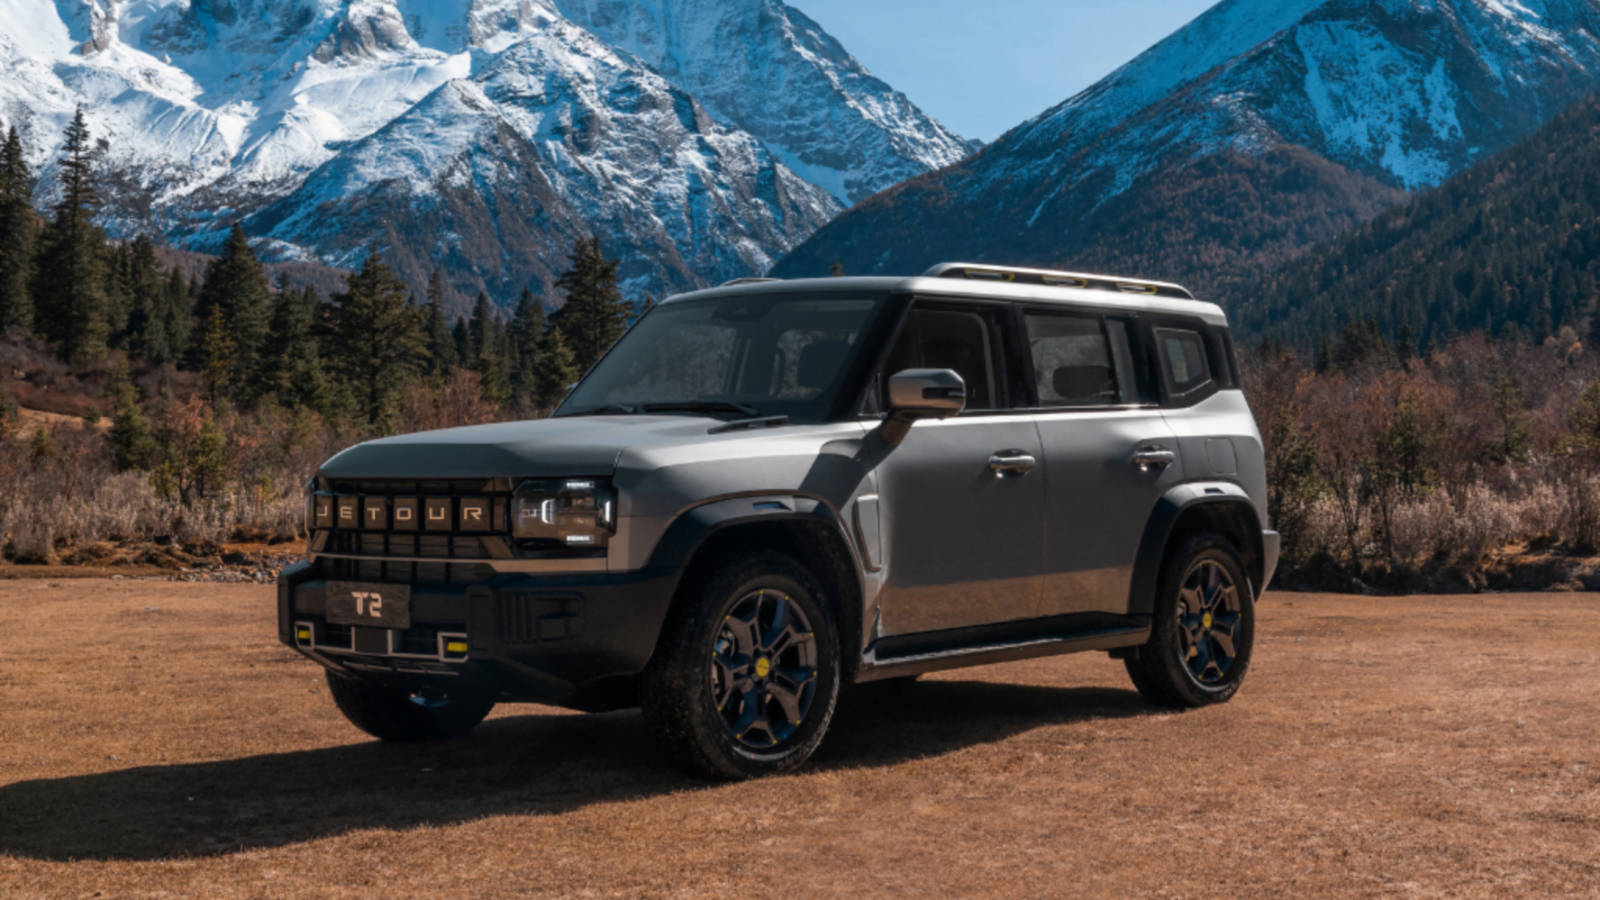 Jetour T2 Review — Modern-day Chinese Adventure SUV